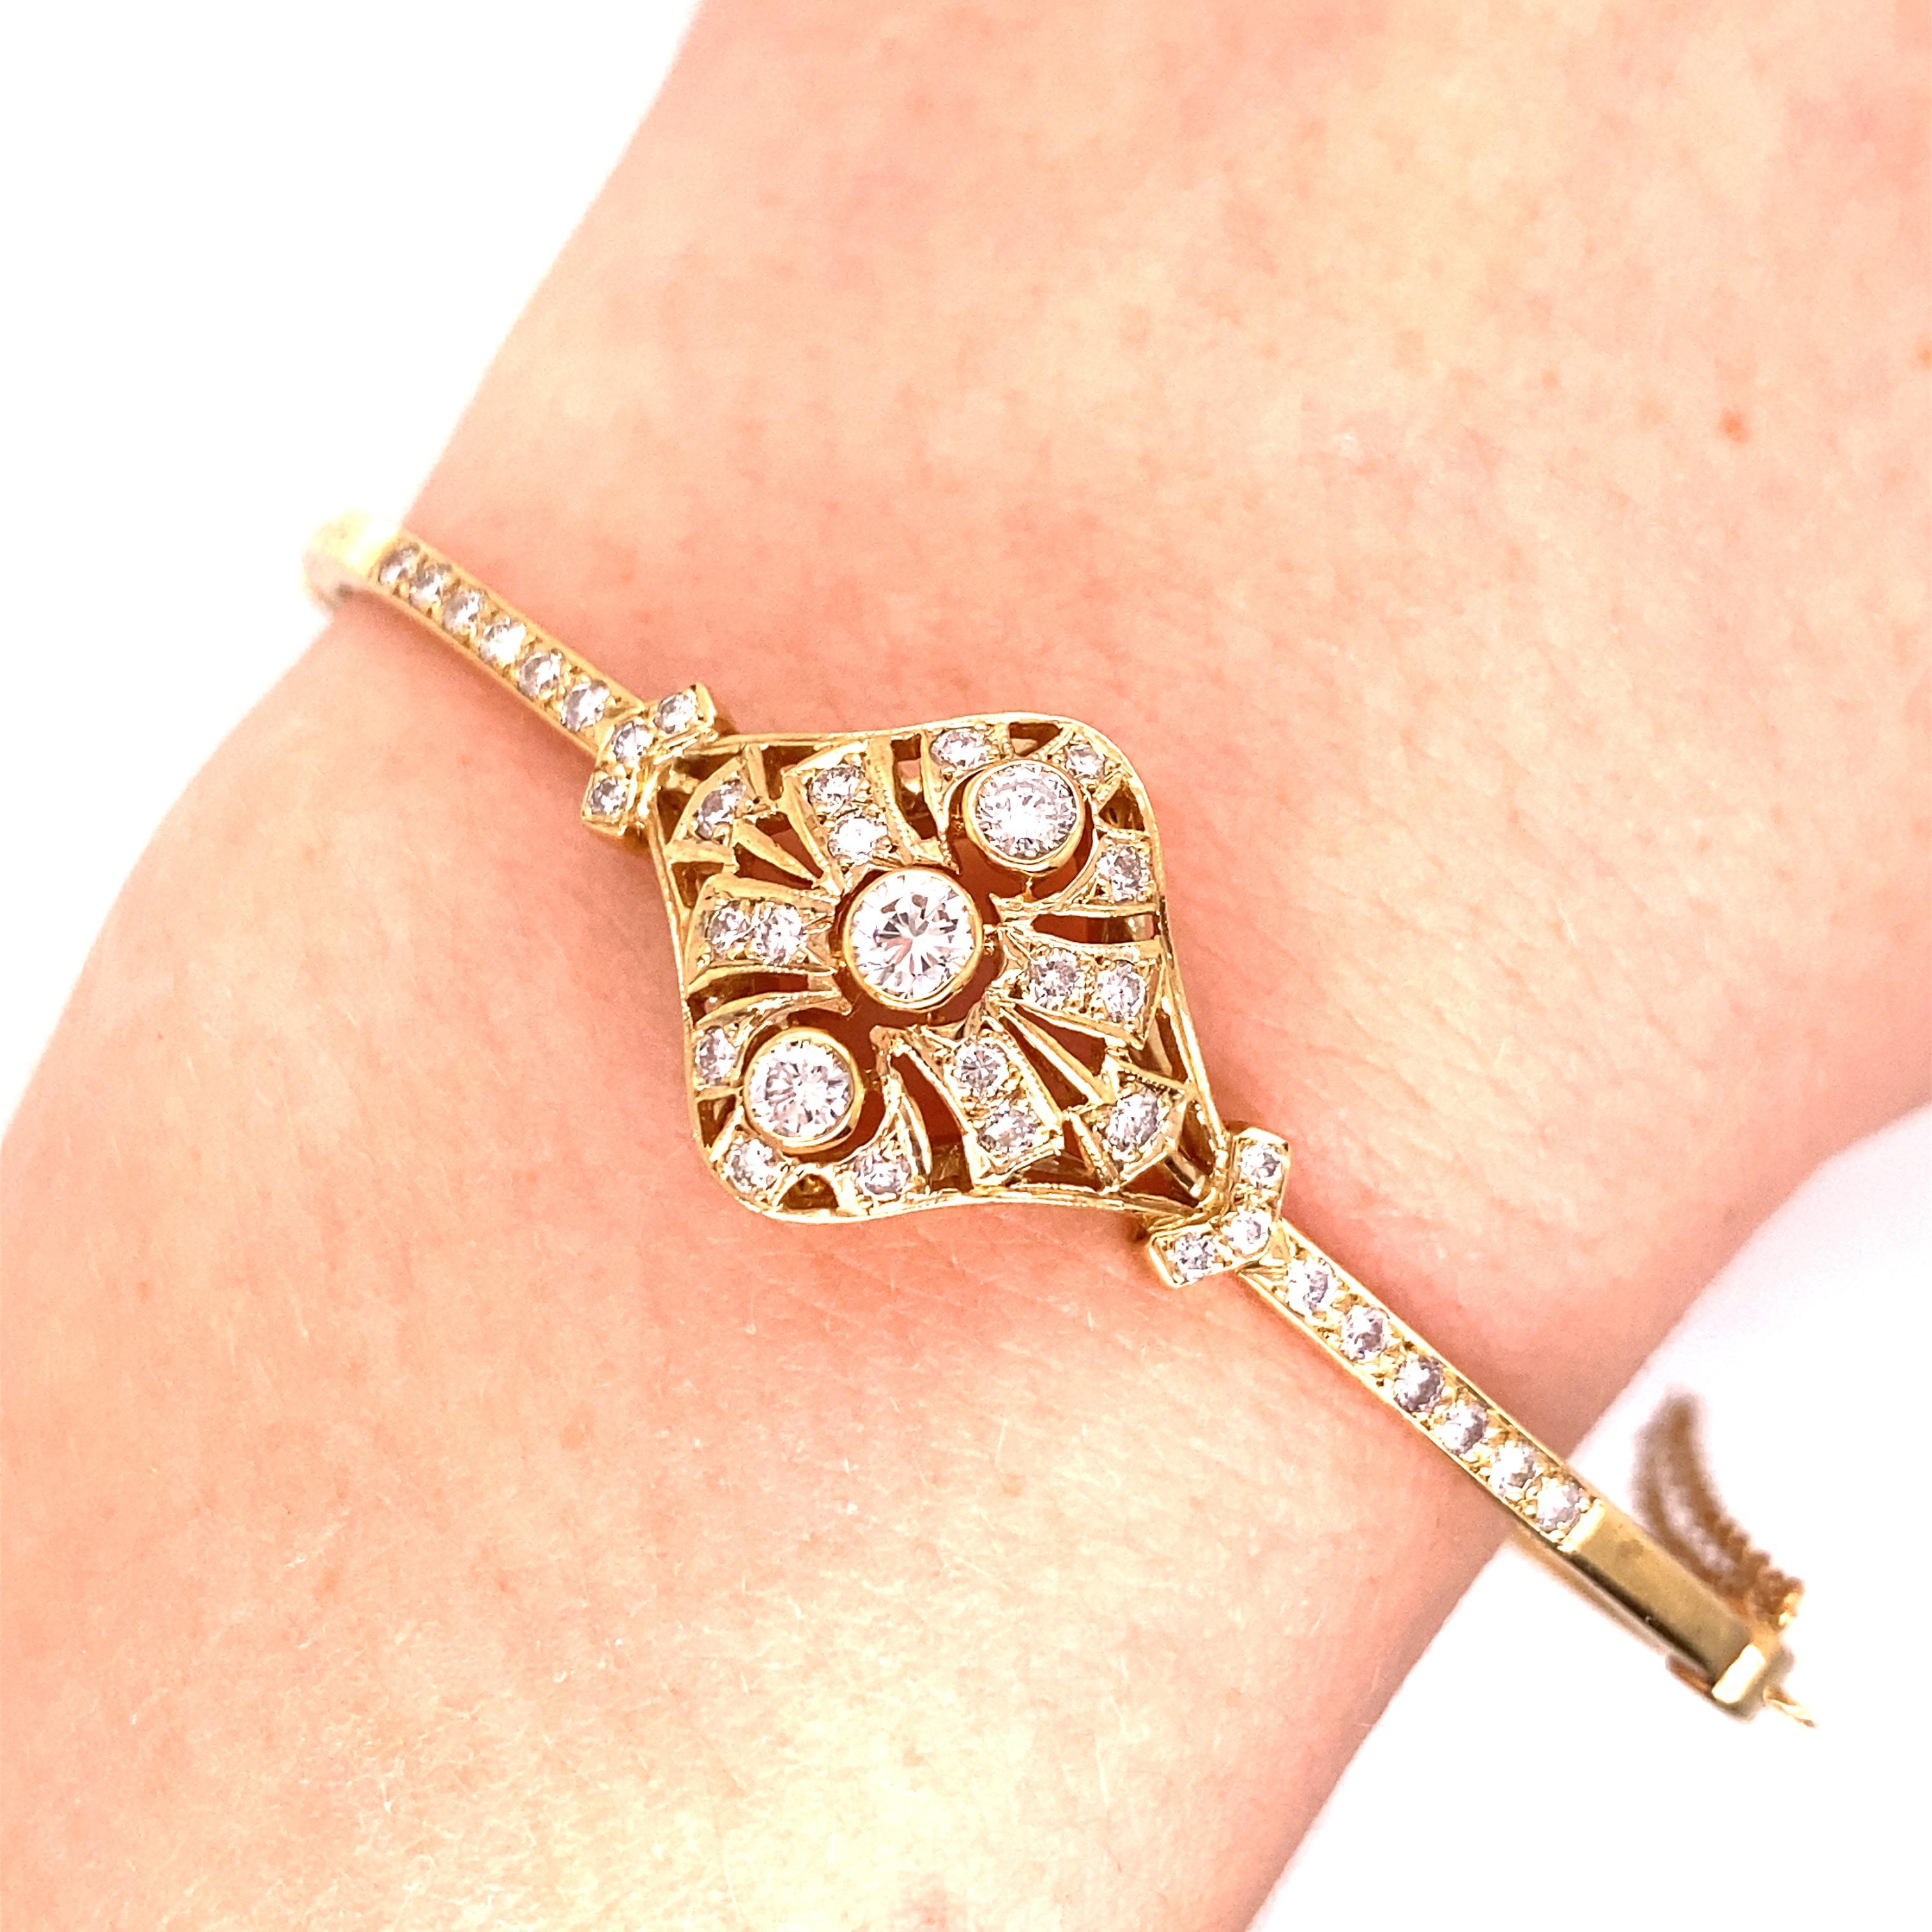 Vintage Victorian Era Reproduction 14K Yellow Gold Diamond Bangle - The bangle contains 38 round brilliant diamonds weighing approximately 1.00ct with G - H color and SI clarity. The width of the bangle in the center measures 16.5mm, and the rest of